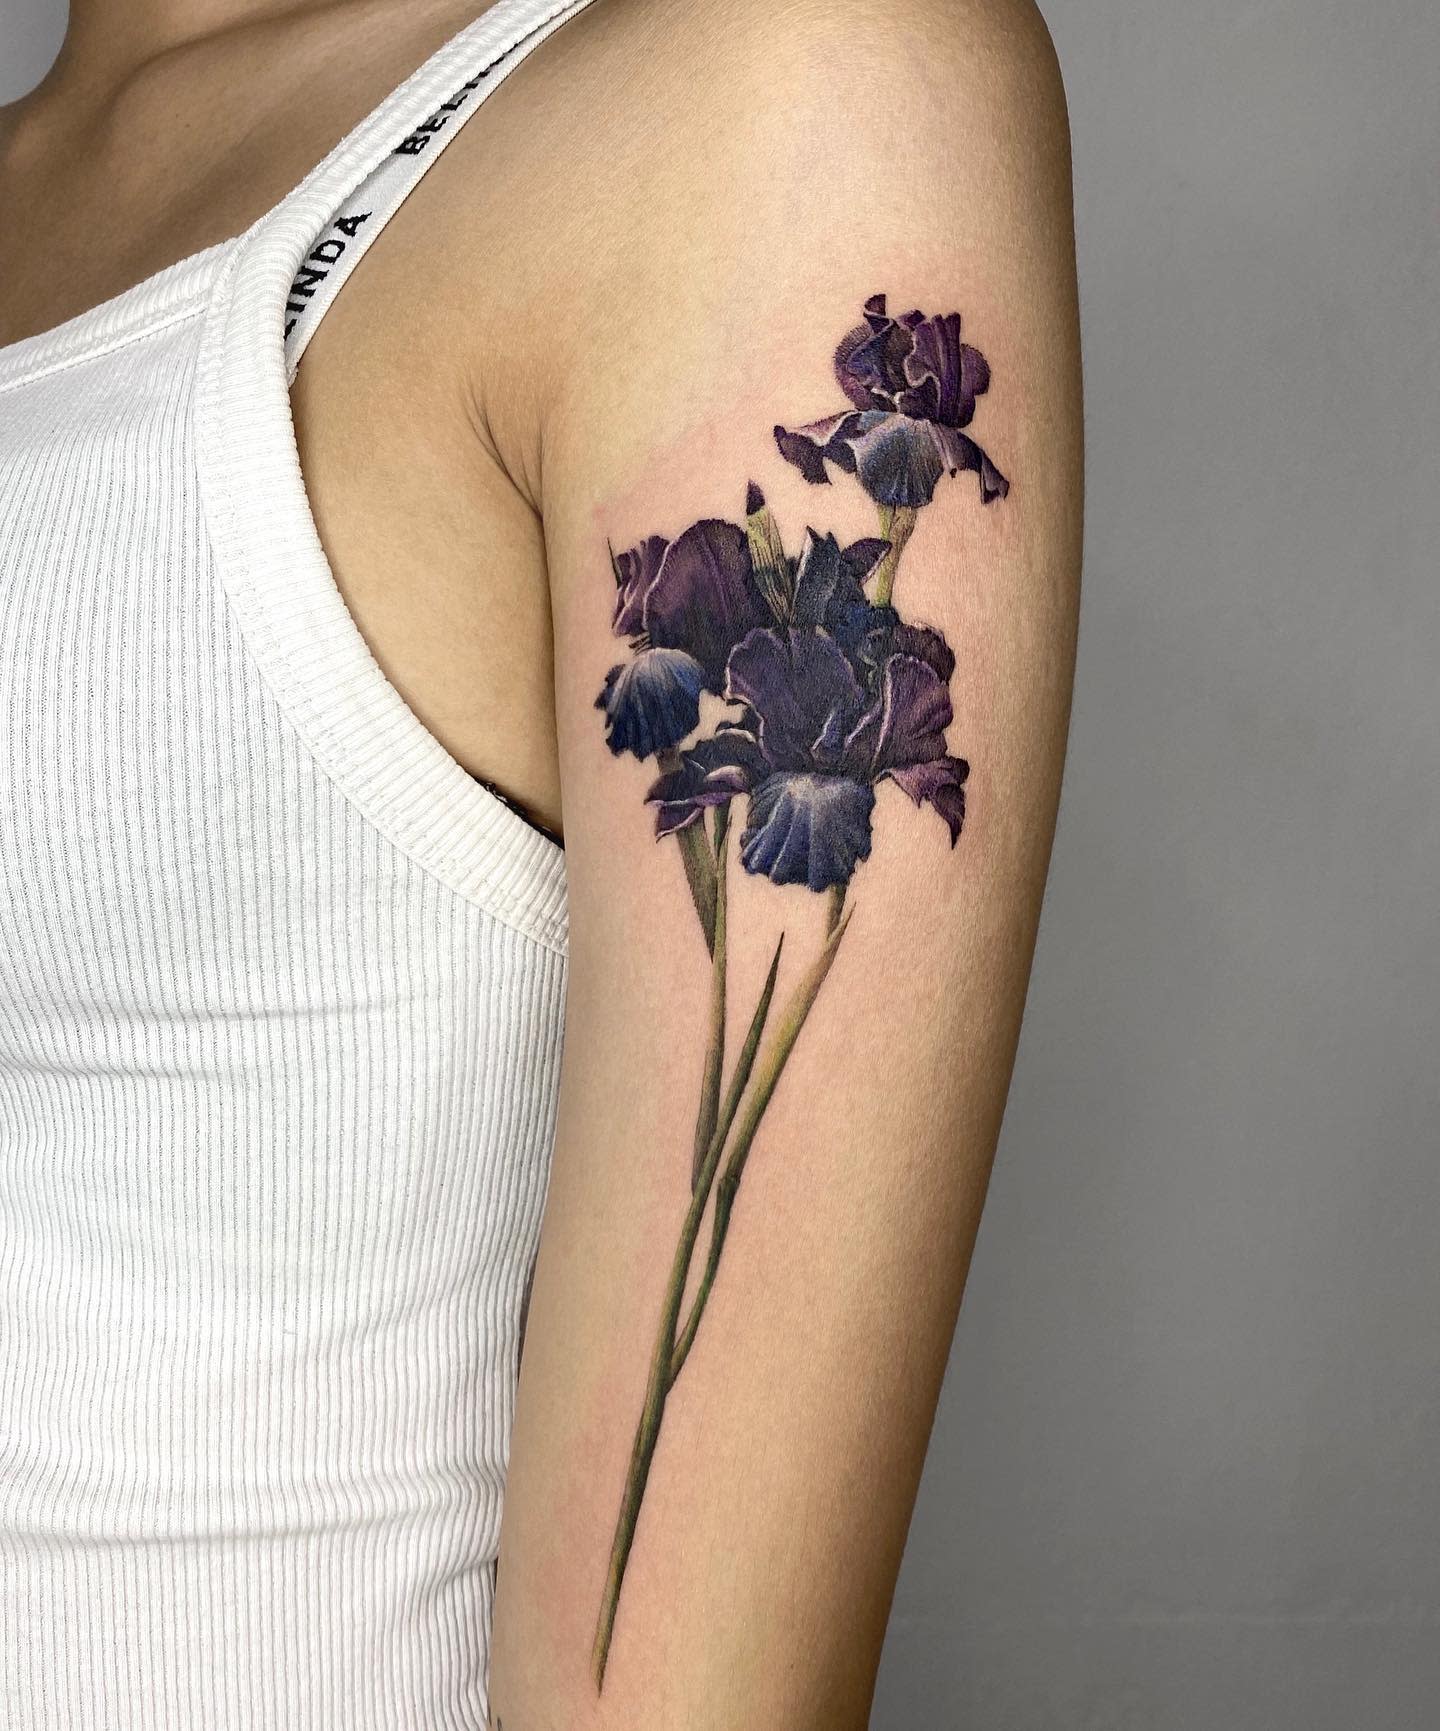 Iris Studio on Instagram A lavender hug  An anklet for Aricel tattooed  by flortizontattoo  IRISbyFlor Book your appointment flortizon tattoo today Link in